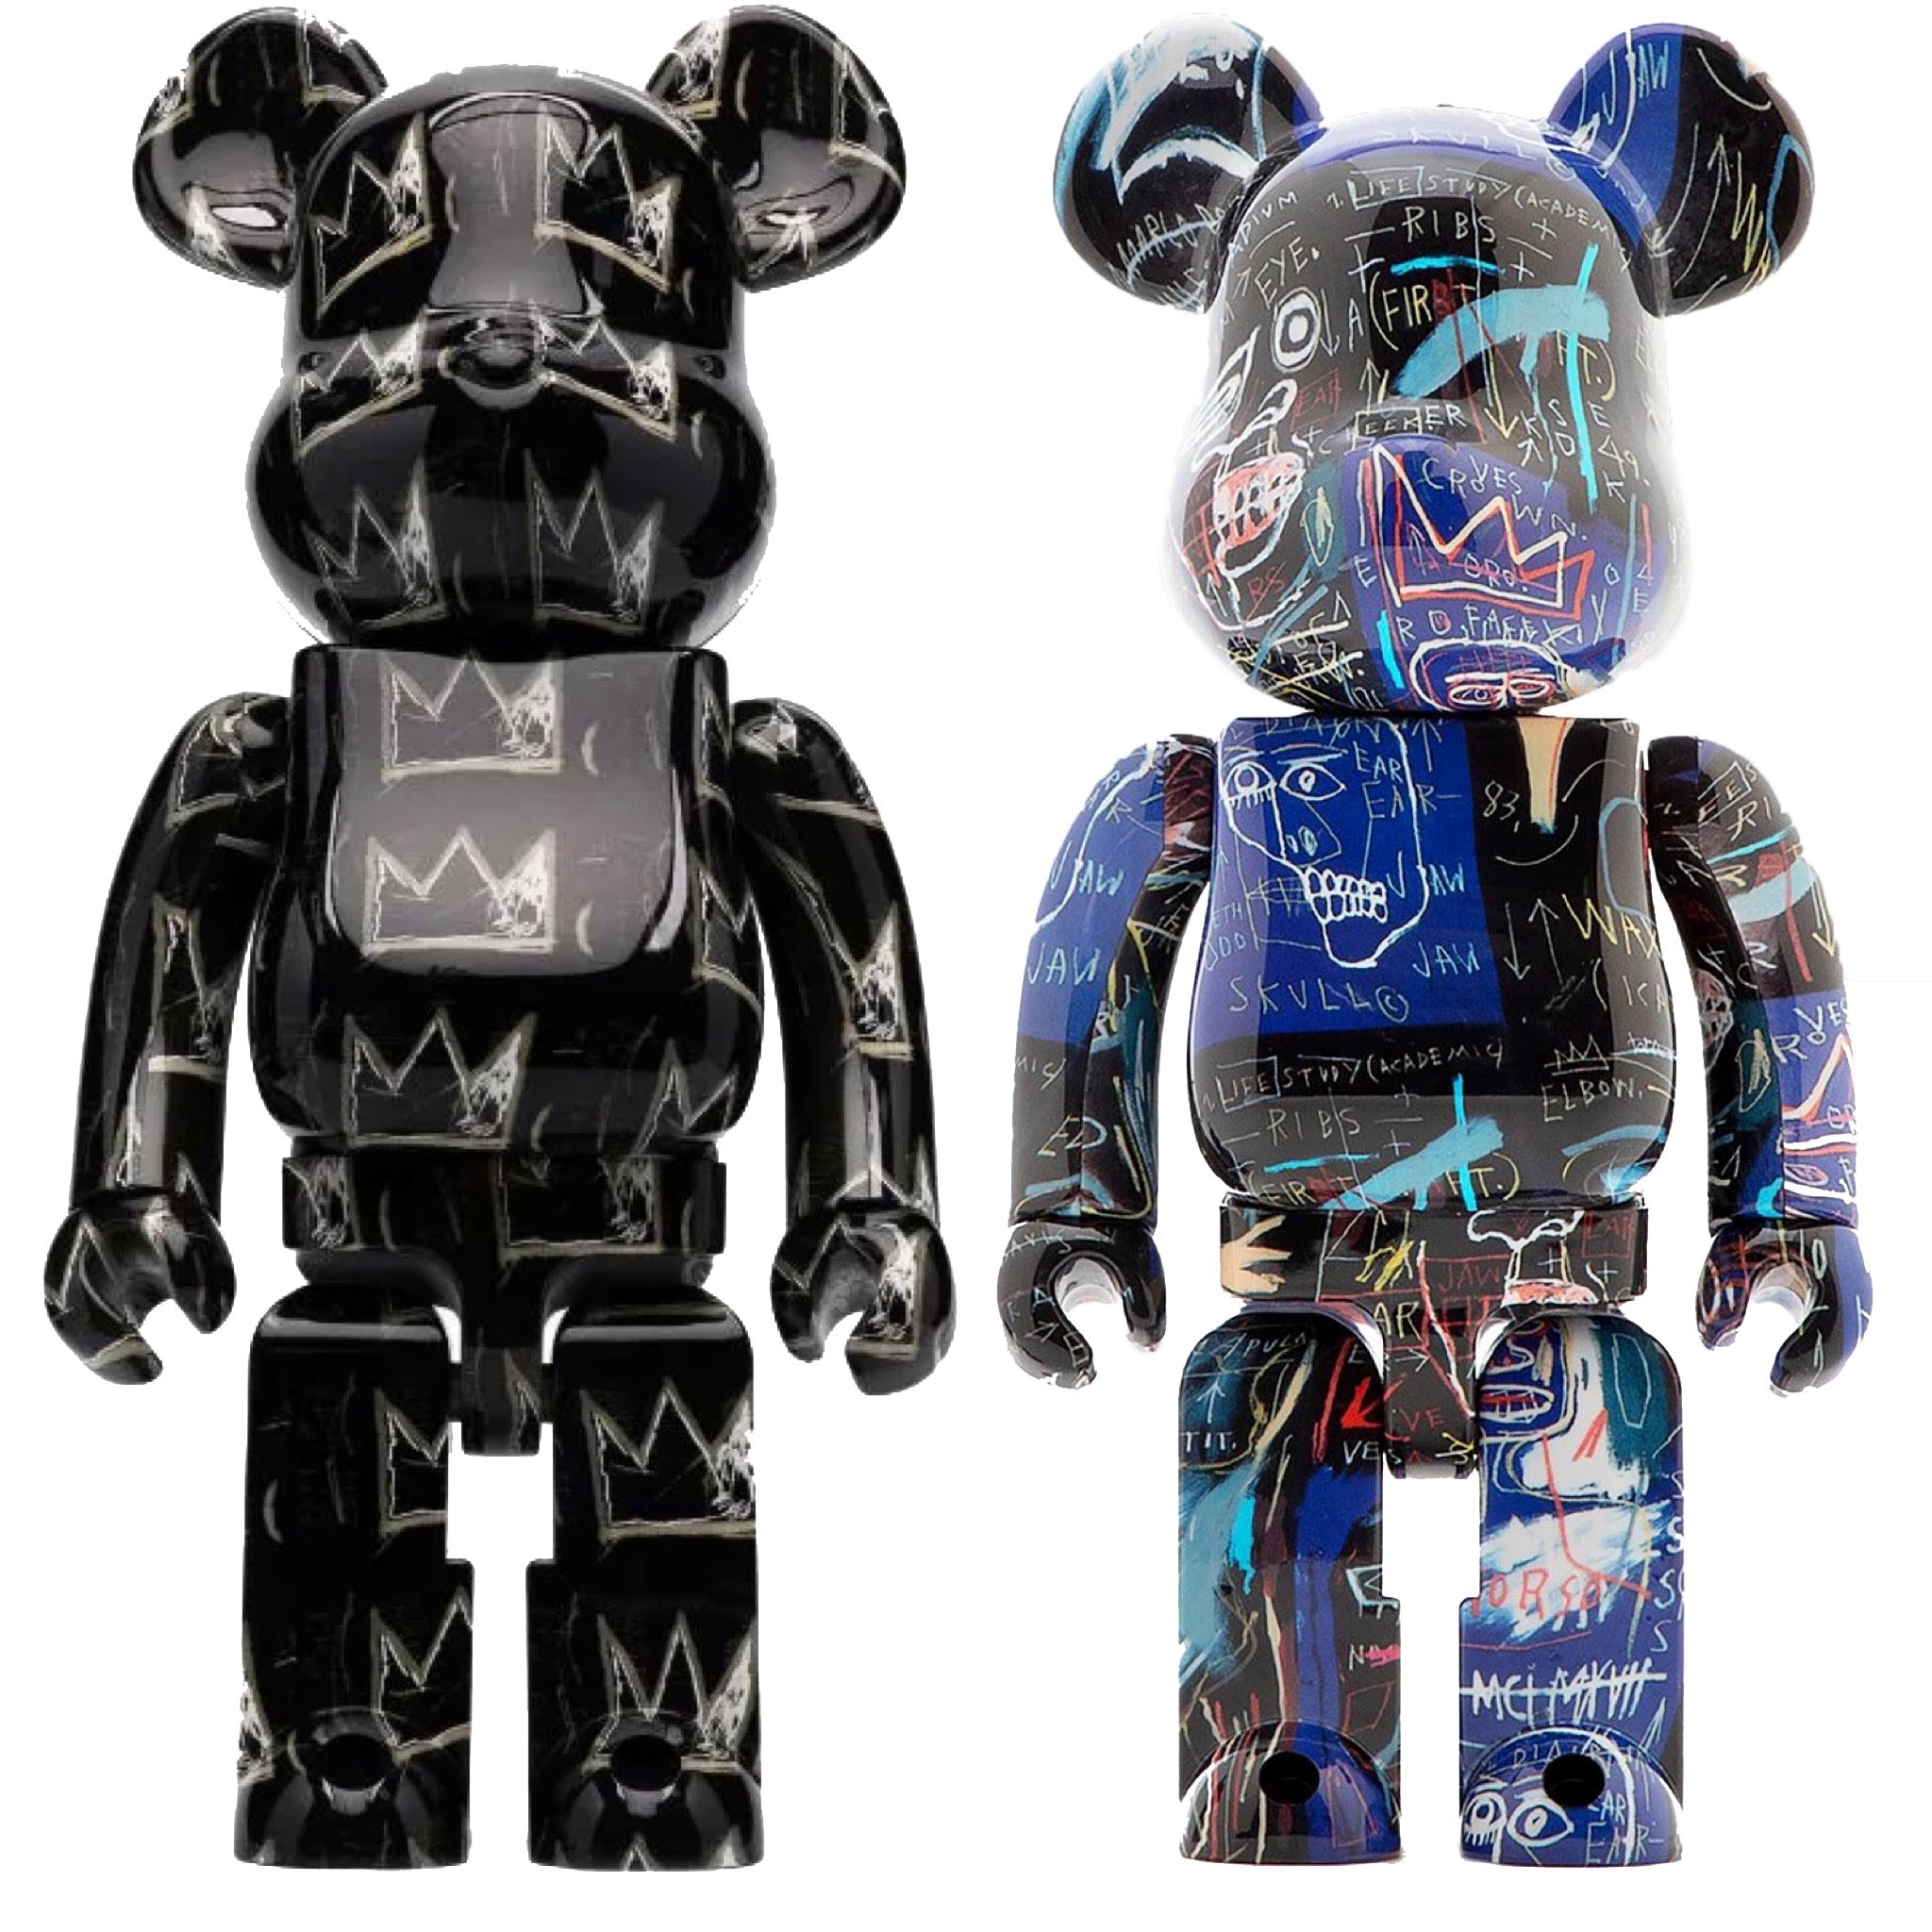 bearbrick 400 size in inches